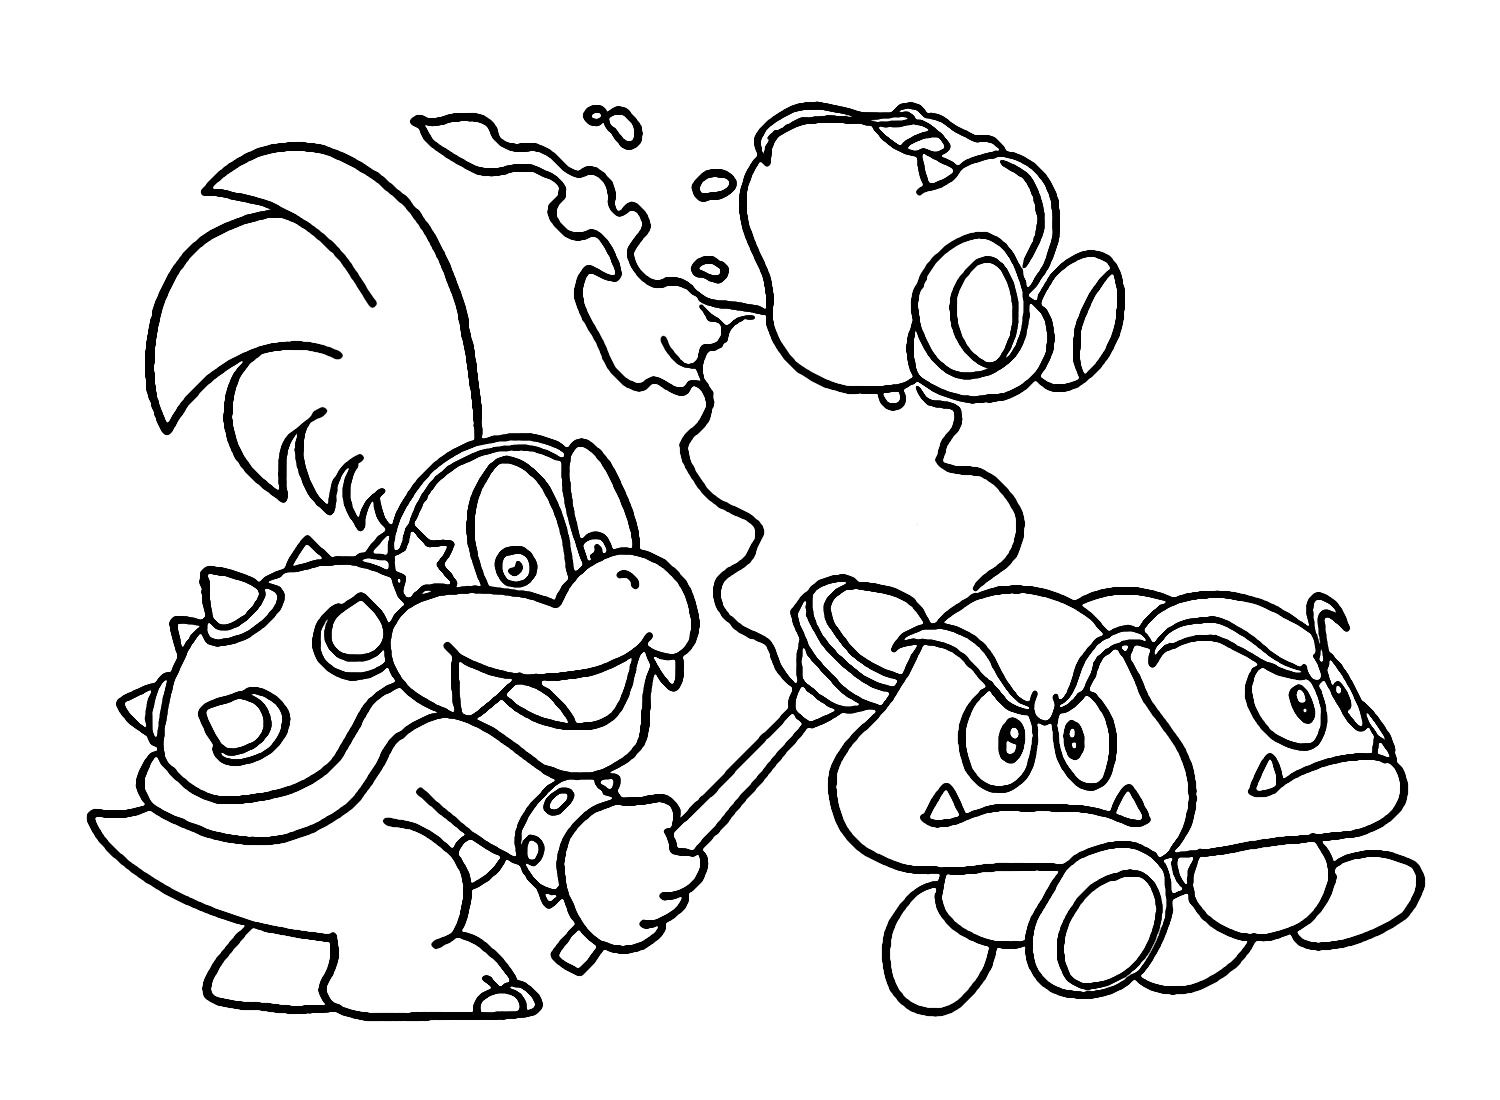 Pictures Koopalings Coloring Pages